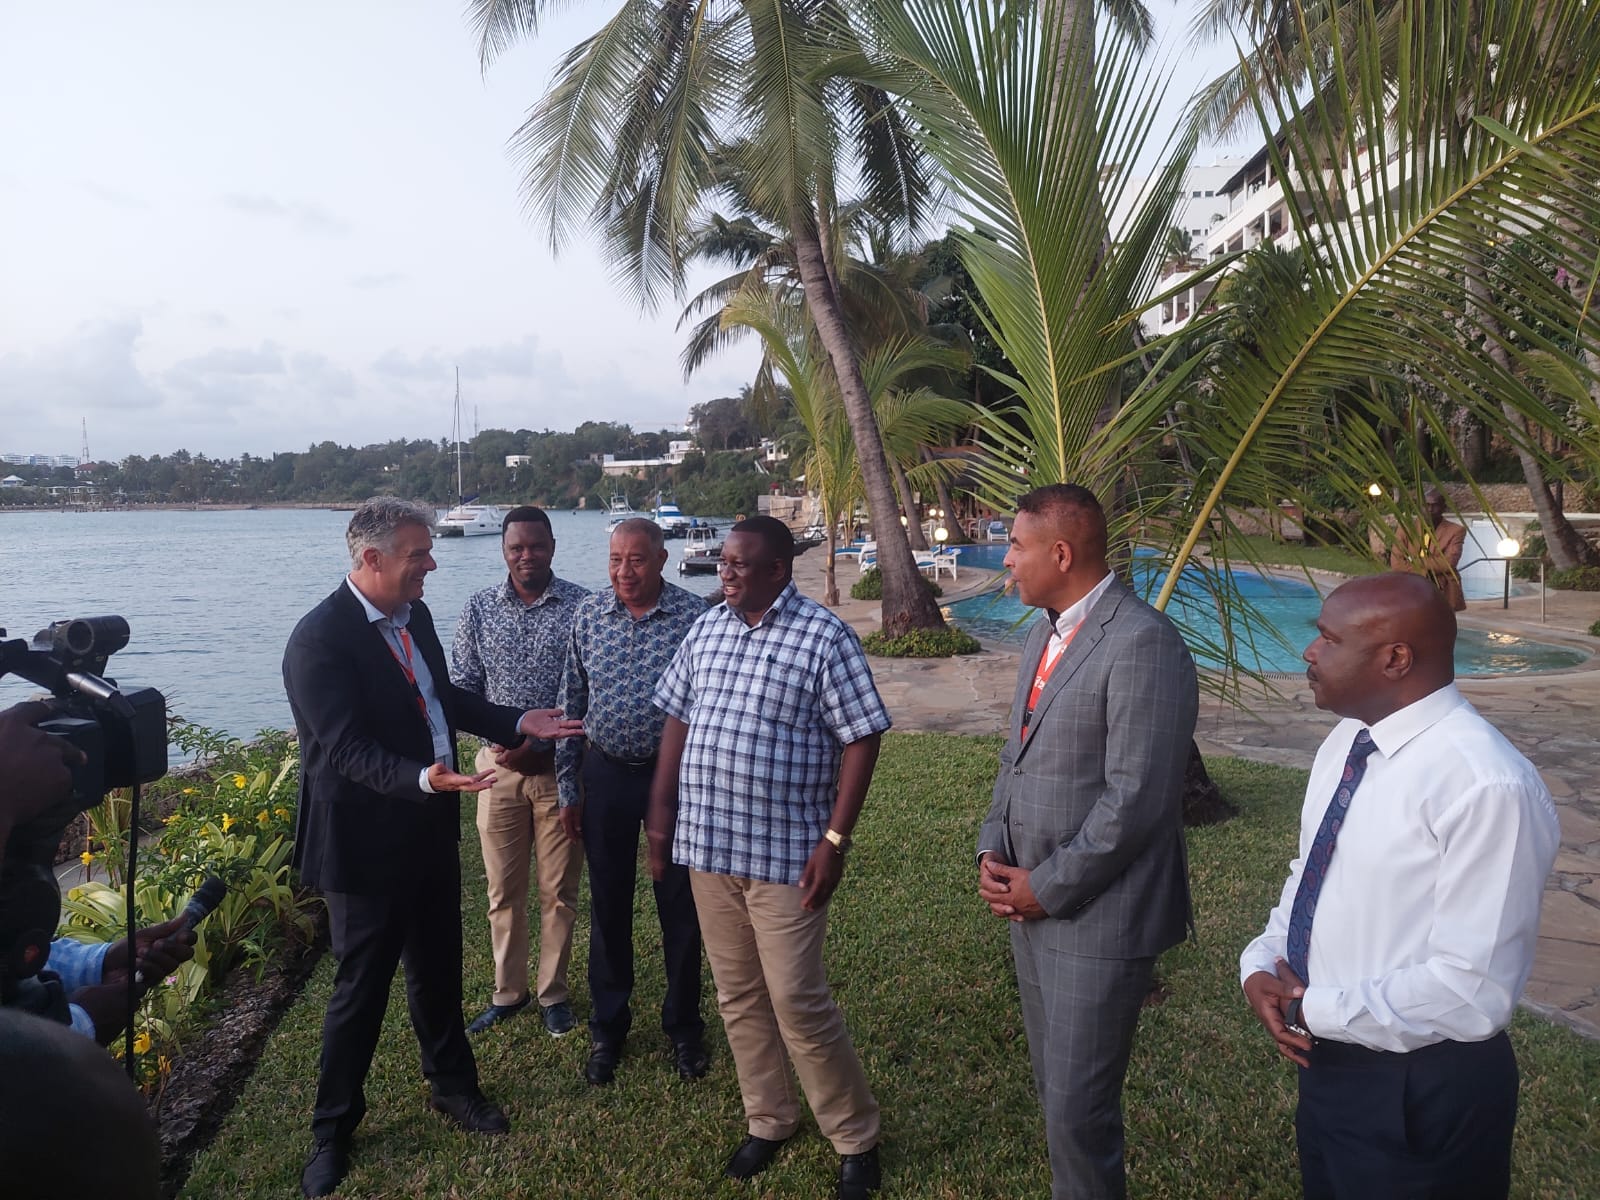 LAMU & COASTAL COUNTIES TO TAP INTO BLUE ECONOMY OPPORTUNITIES